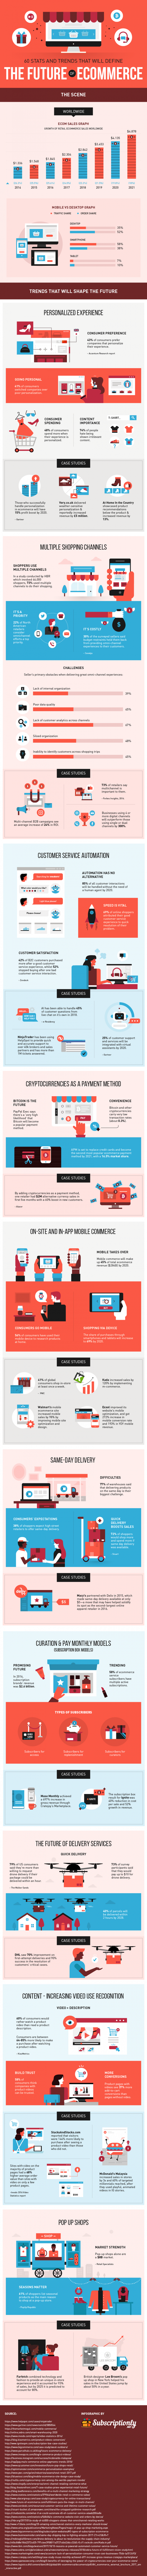 future of ecommerce infographic